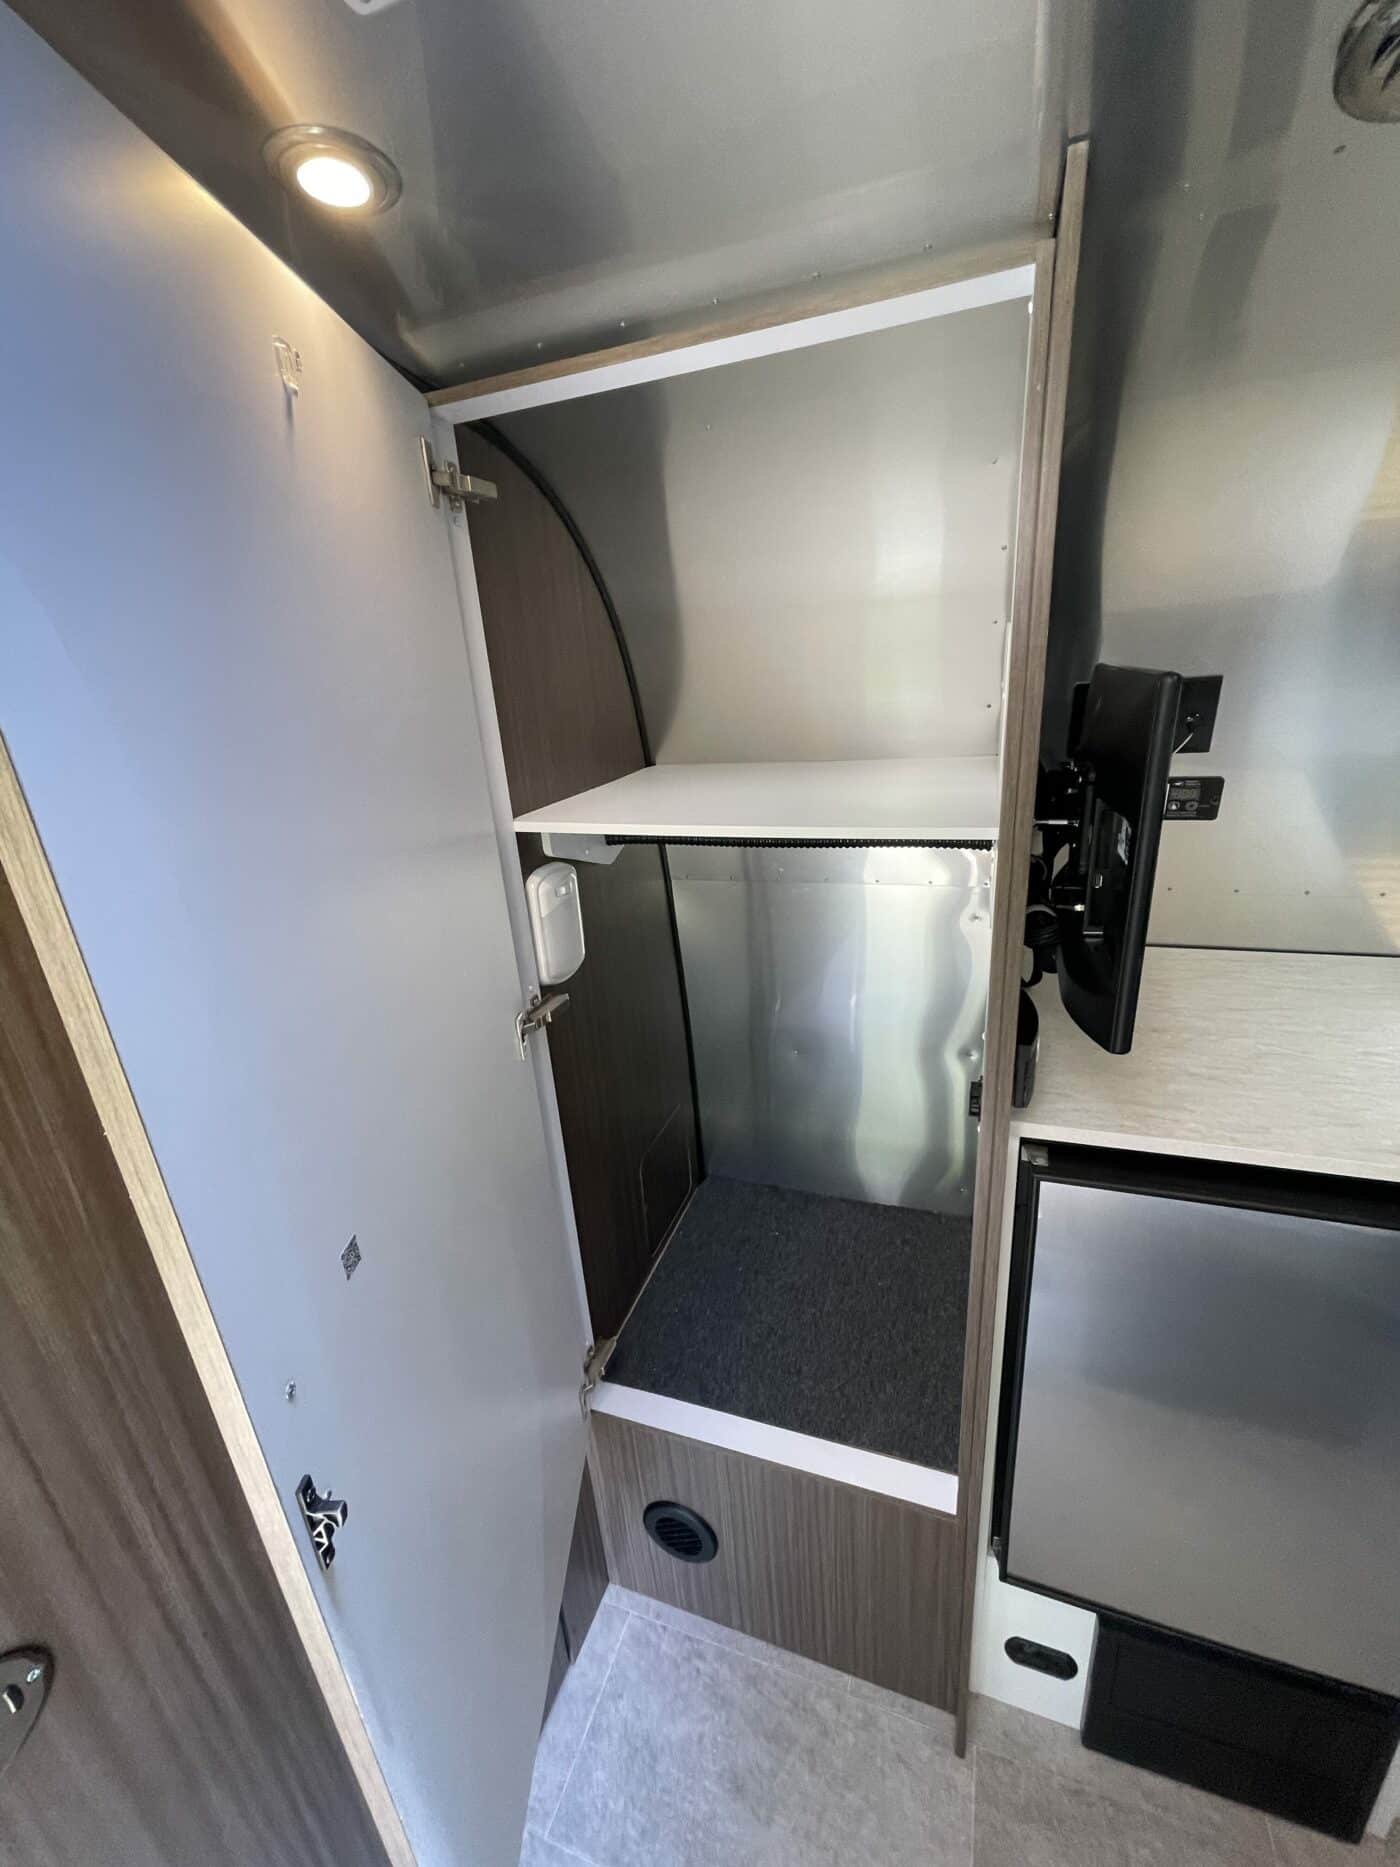 2022 22FT Caravel For Sale In Leander, Texas - Airstream Marketplace